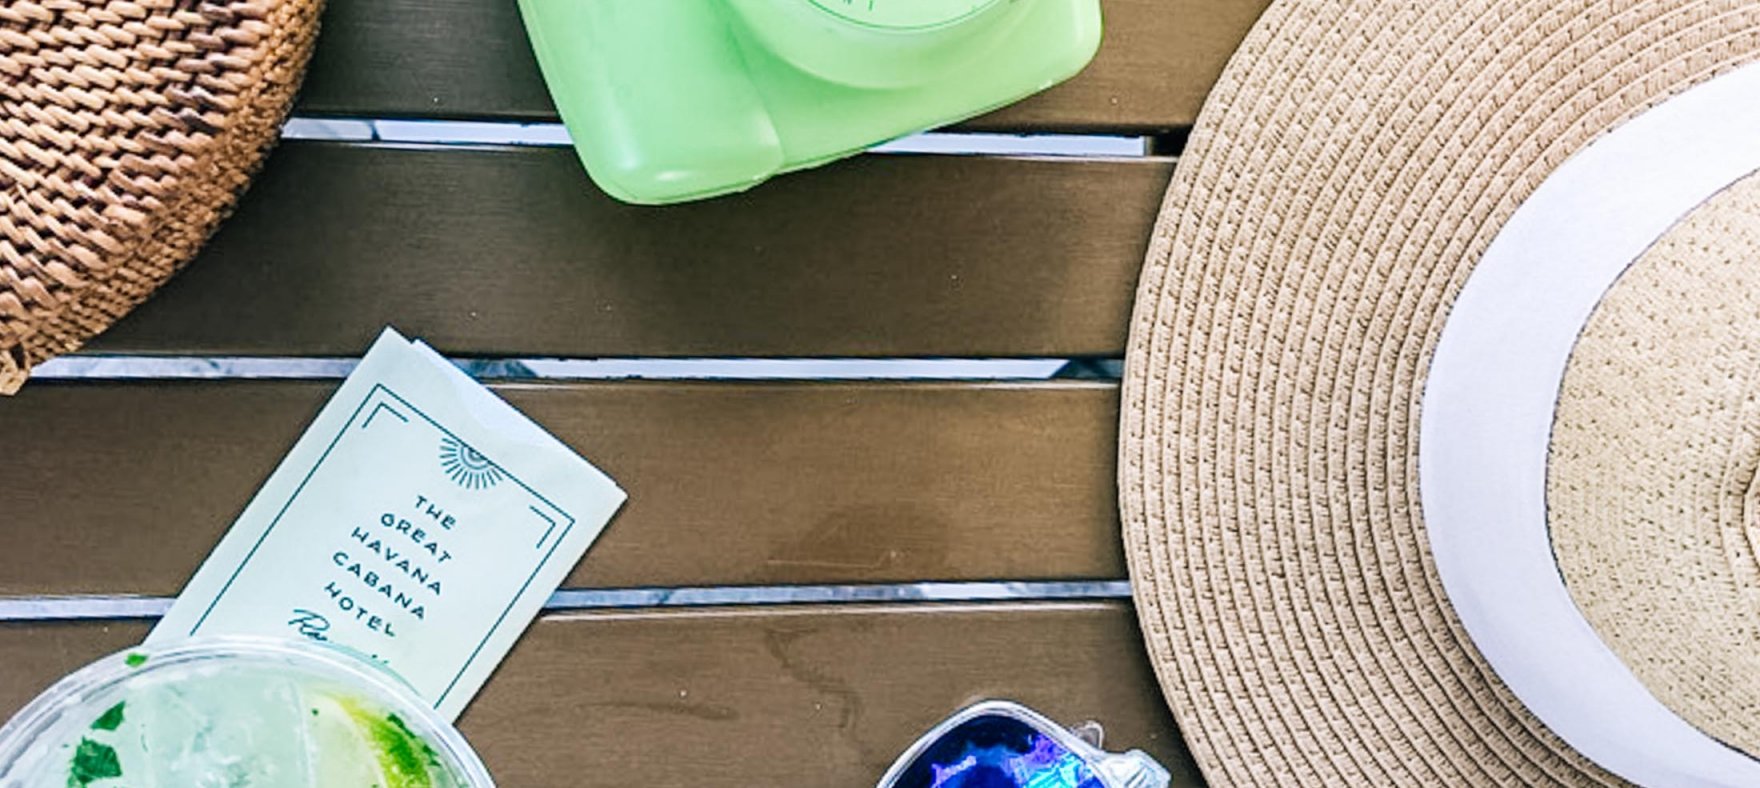 A straw hat next to a pair of sunglasses, a glass of mojito, Havana Cabana collectible card, woven bowl, an instant camera and a smartwatch